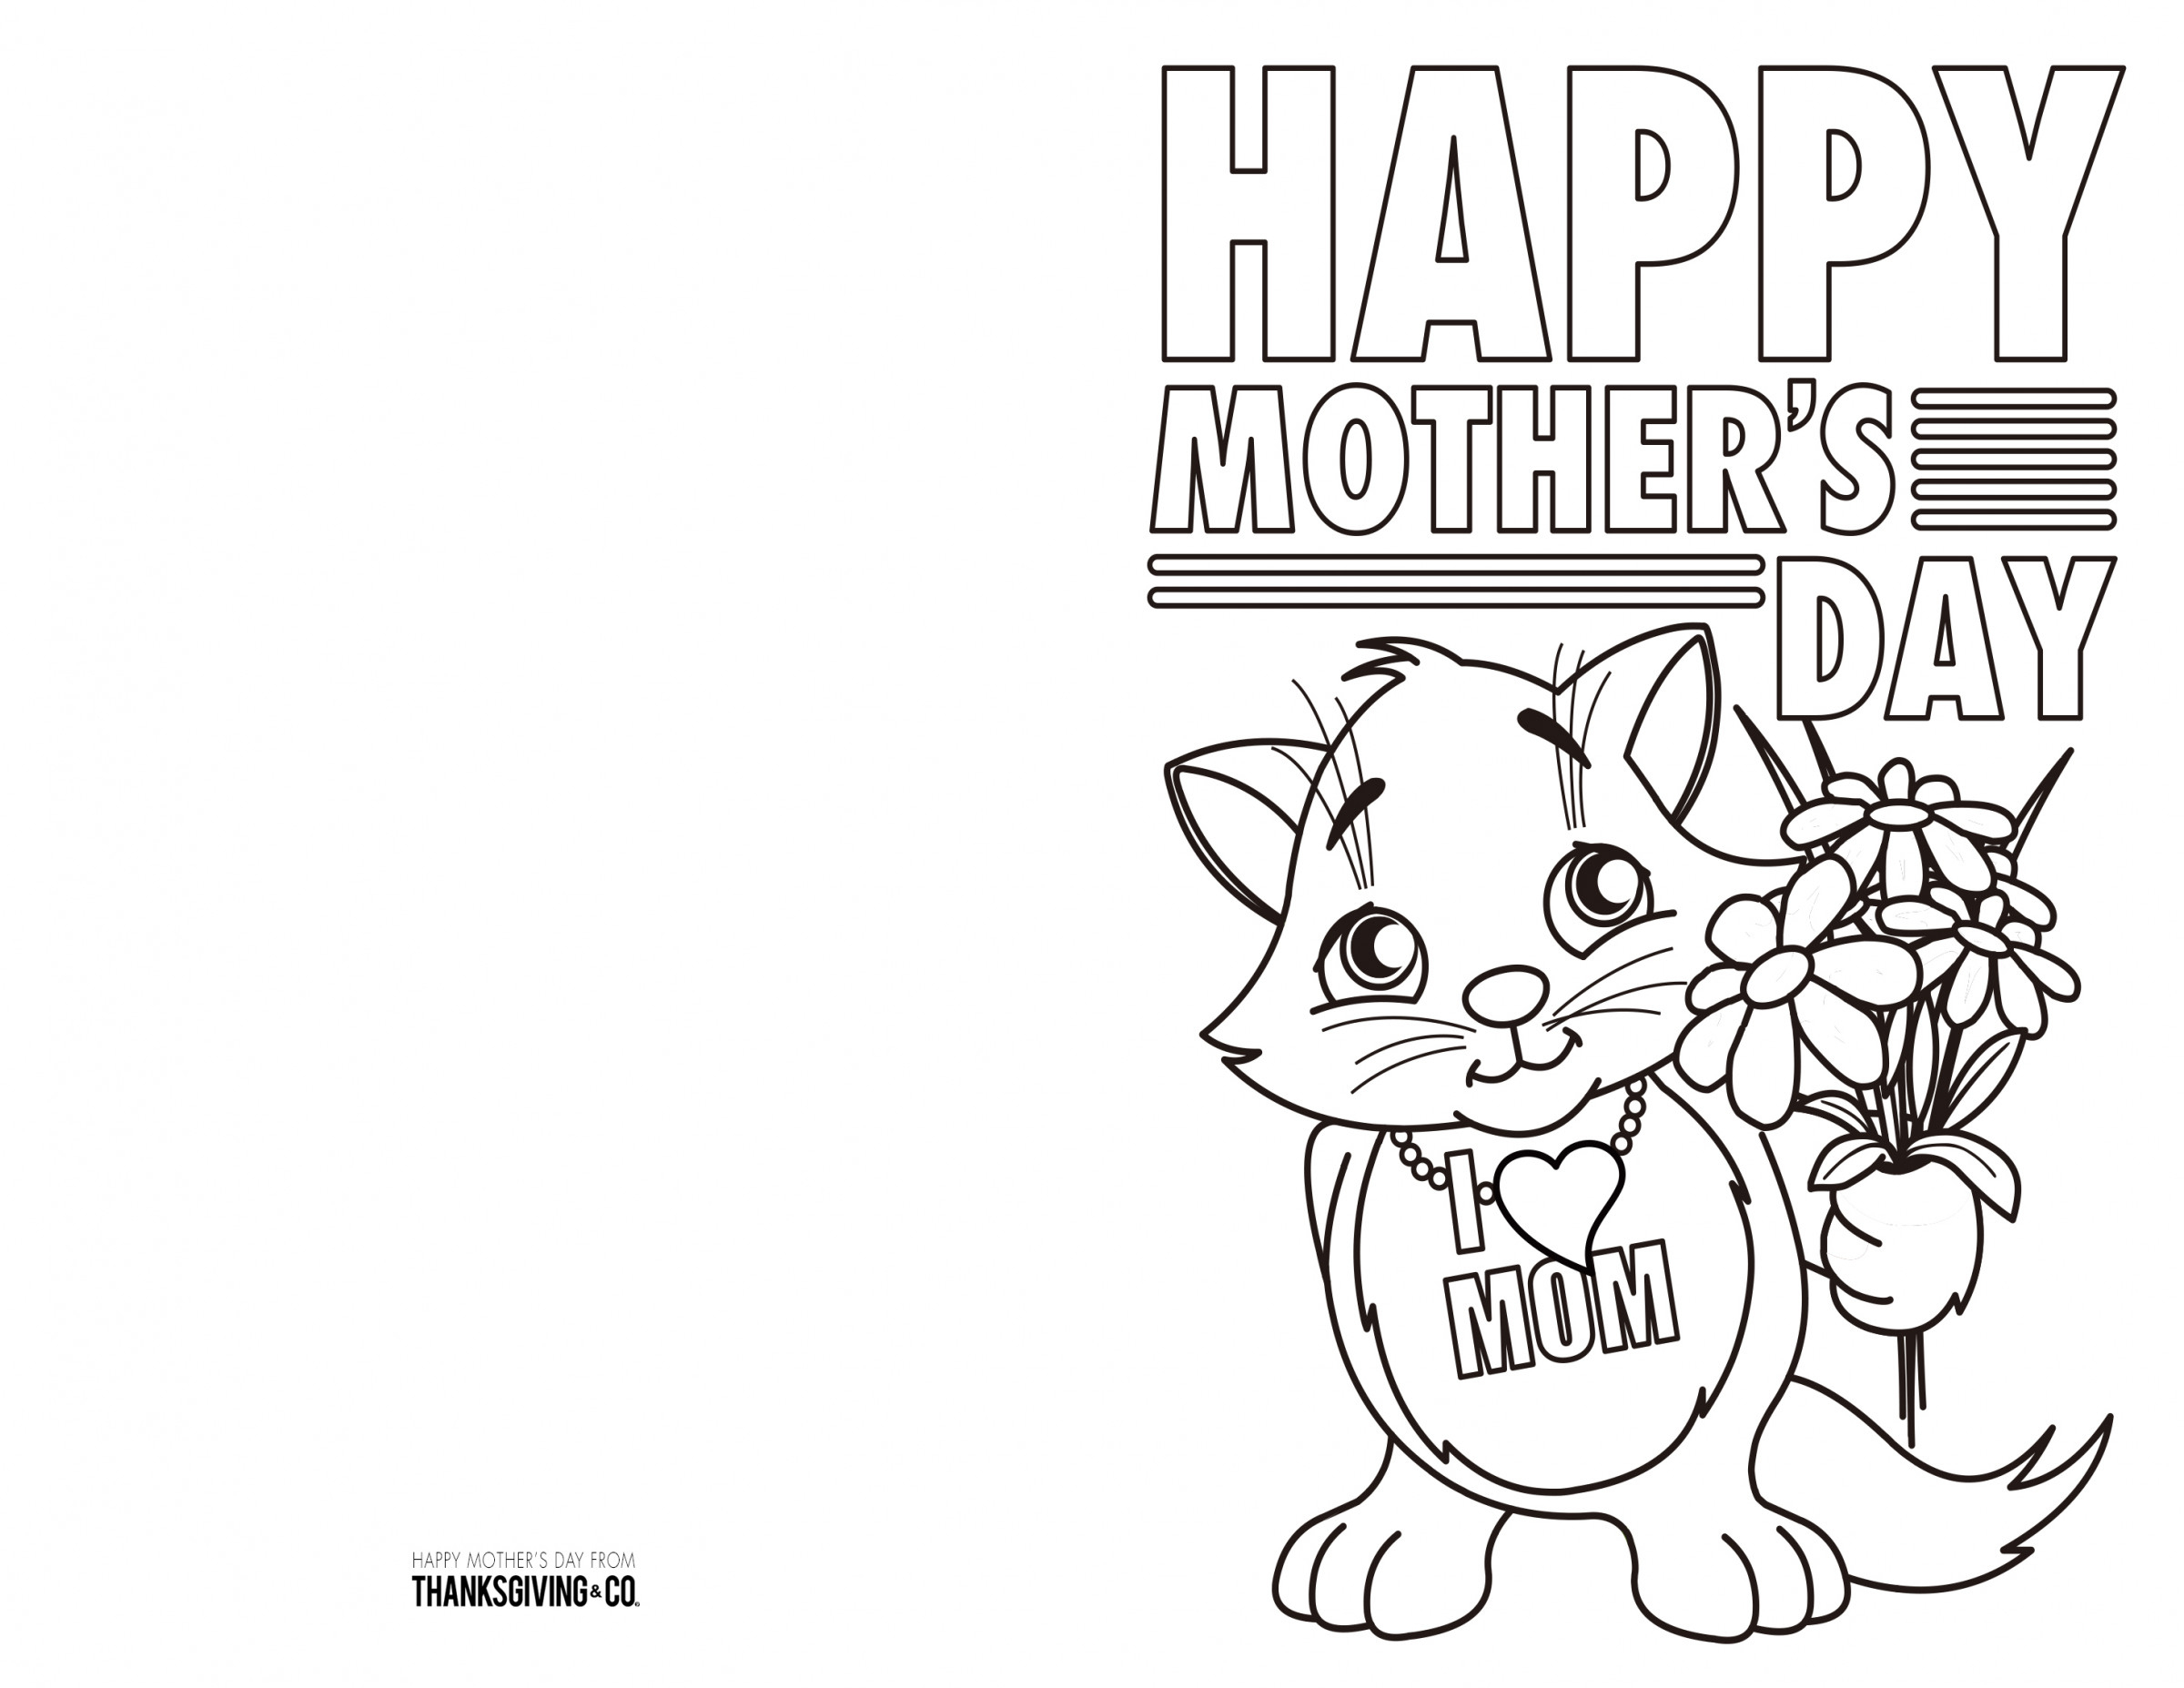 4 Free Printable Mother&amp;#039;s Day Ecards To Color - Thanksgiving - Free Printable Mothers Day Cards To Color